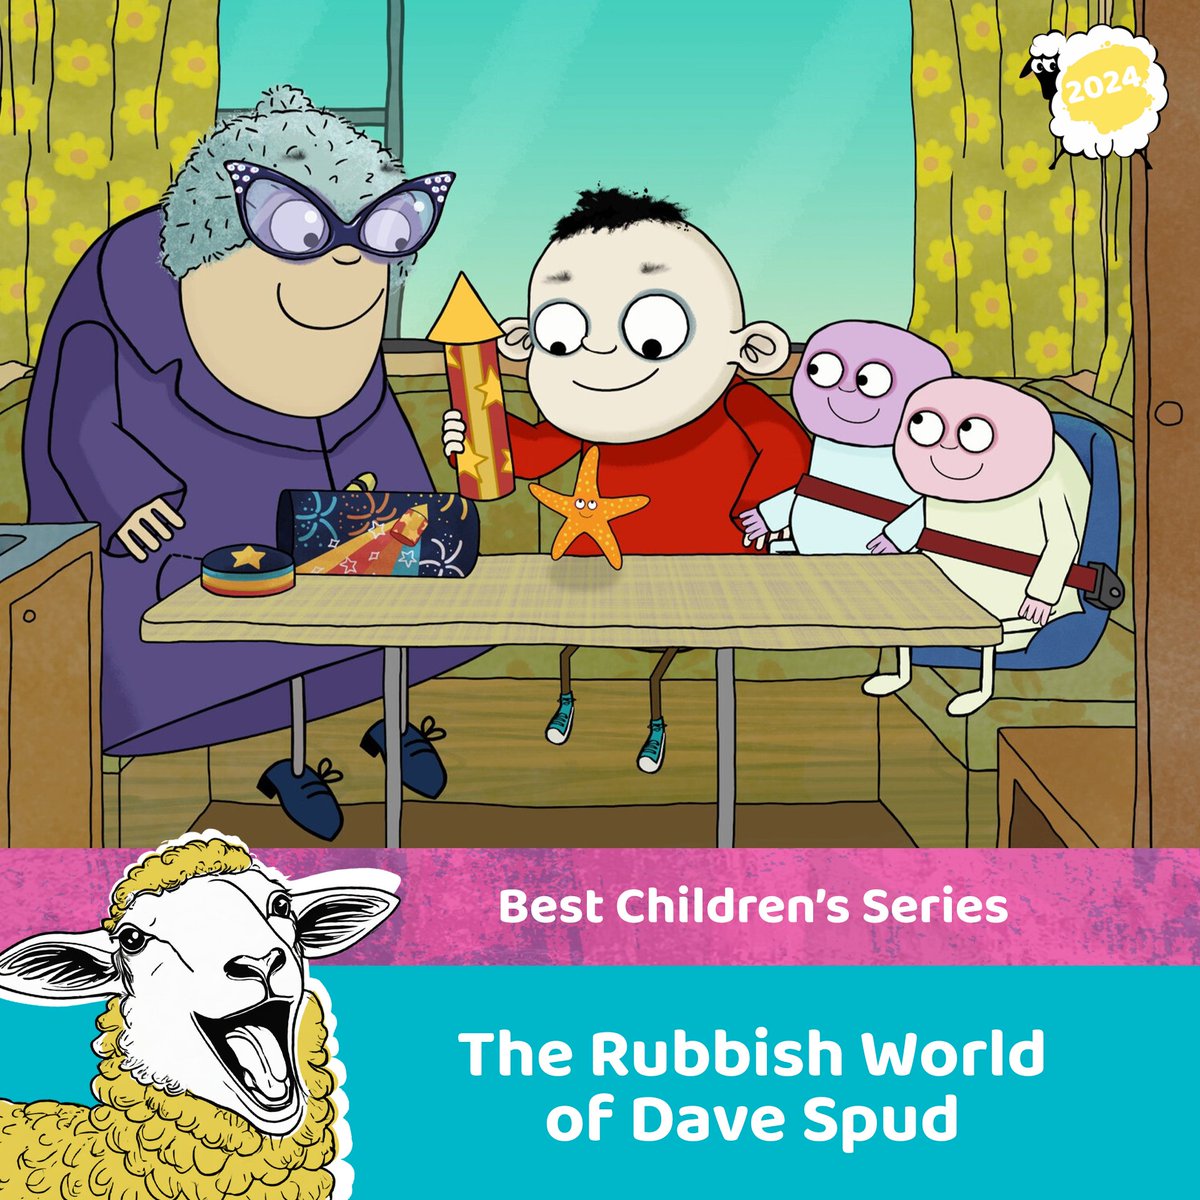 Mega congratulations to The Rubbish World of Dave Spud who are awarded Best Children’s Series! #BAA24